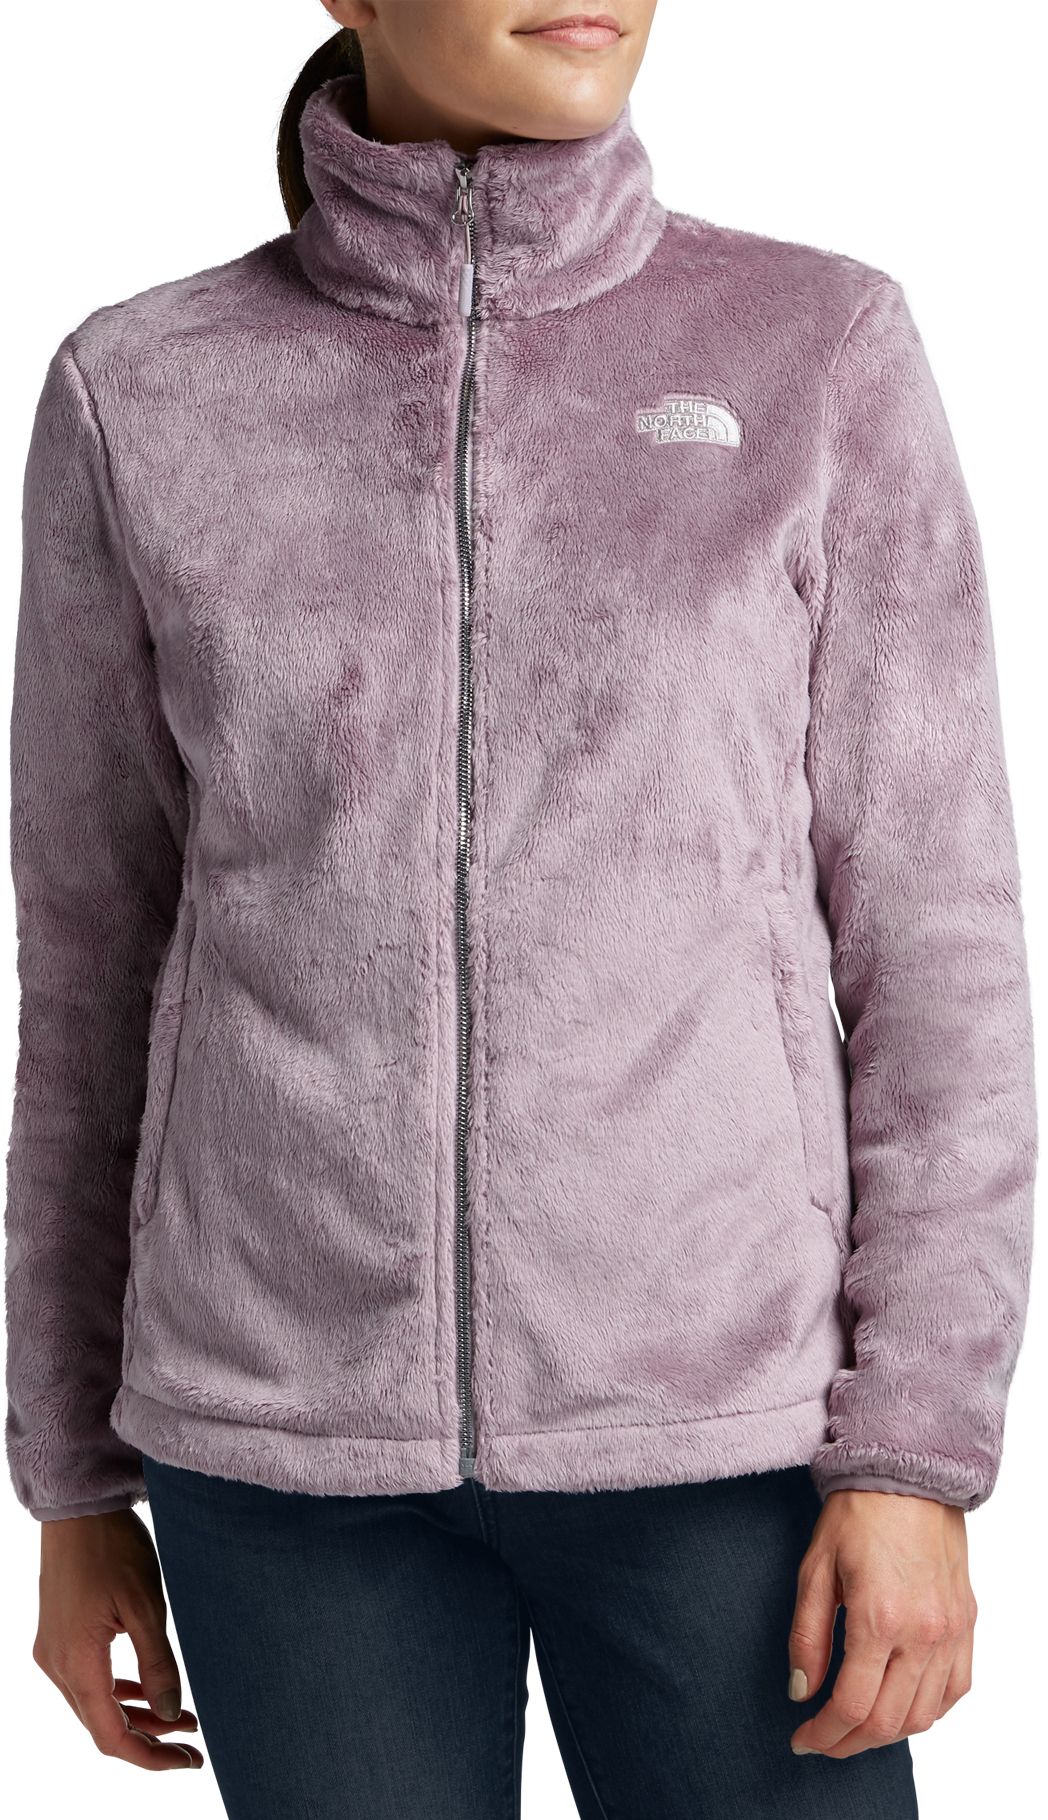 north face coats womens plus size